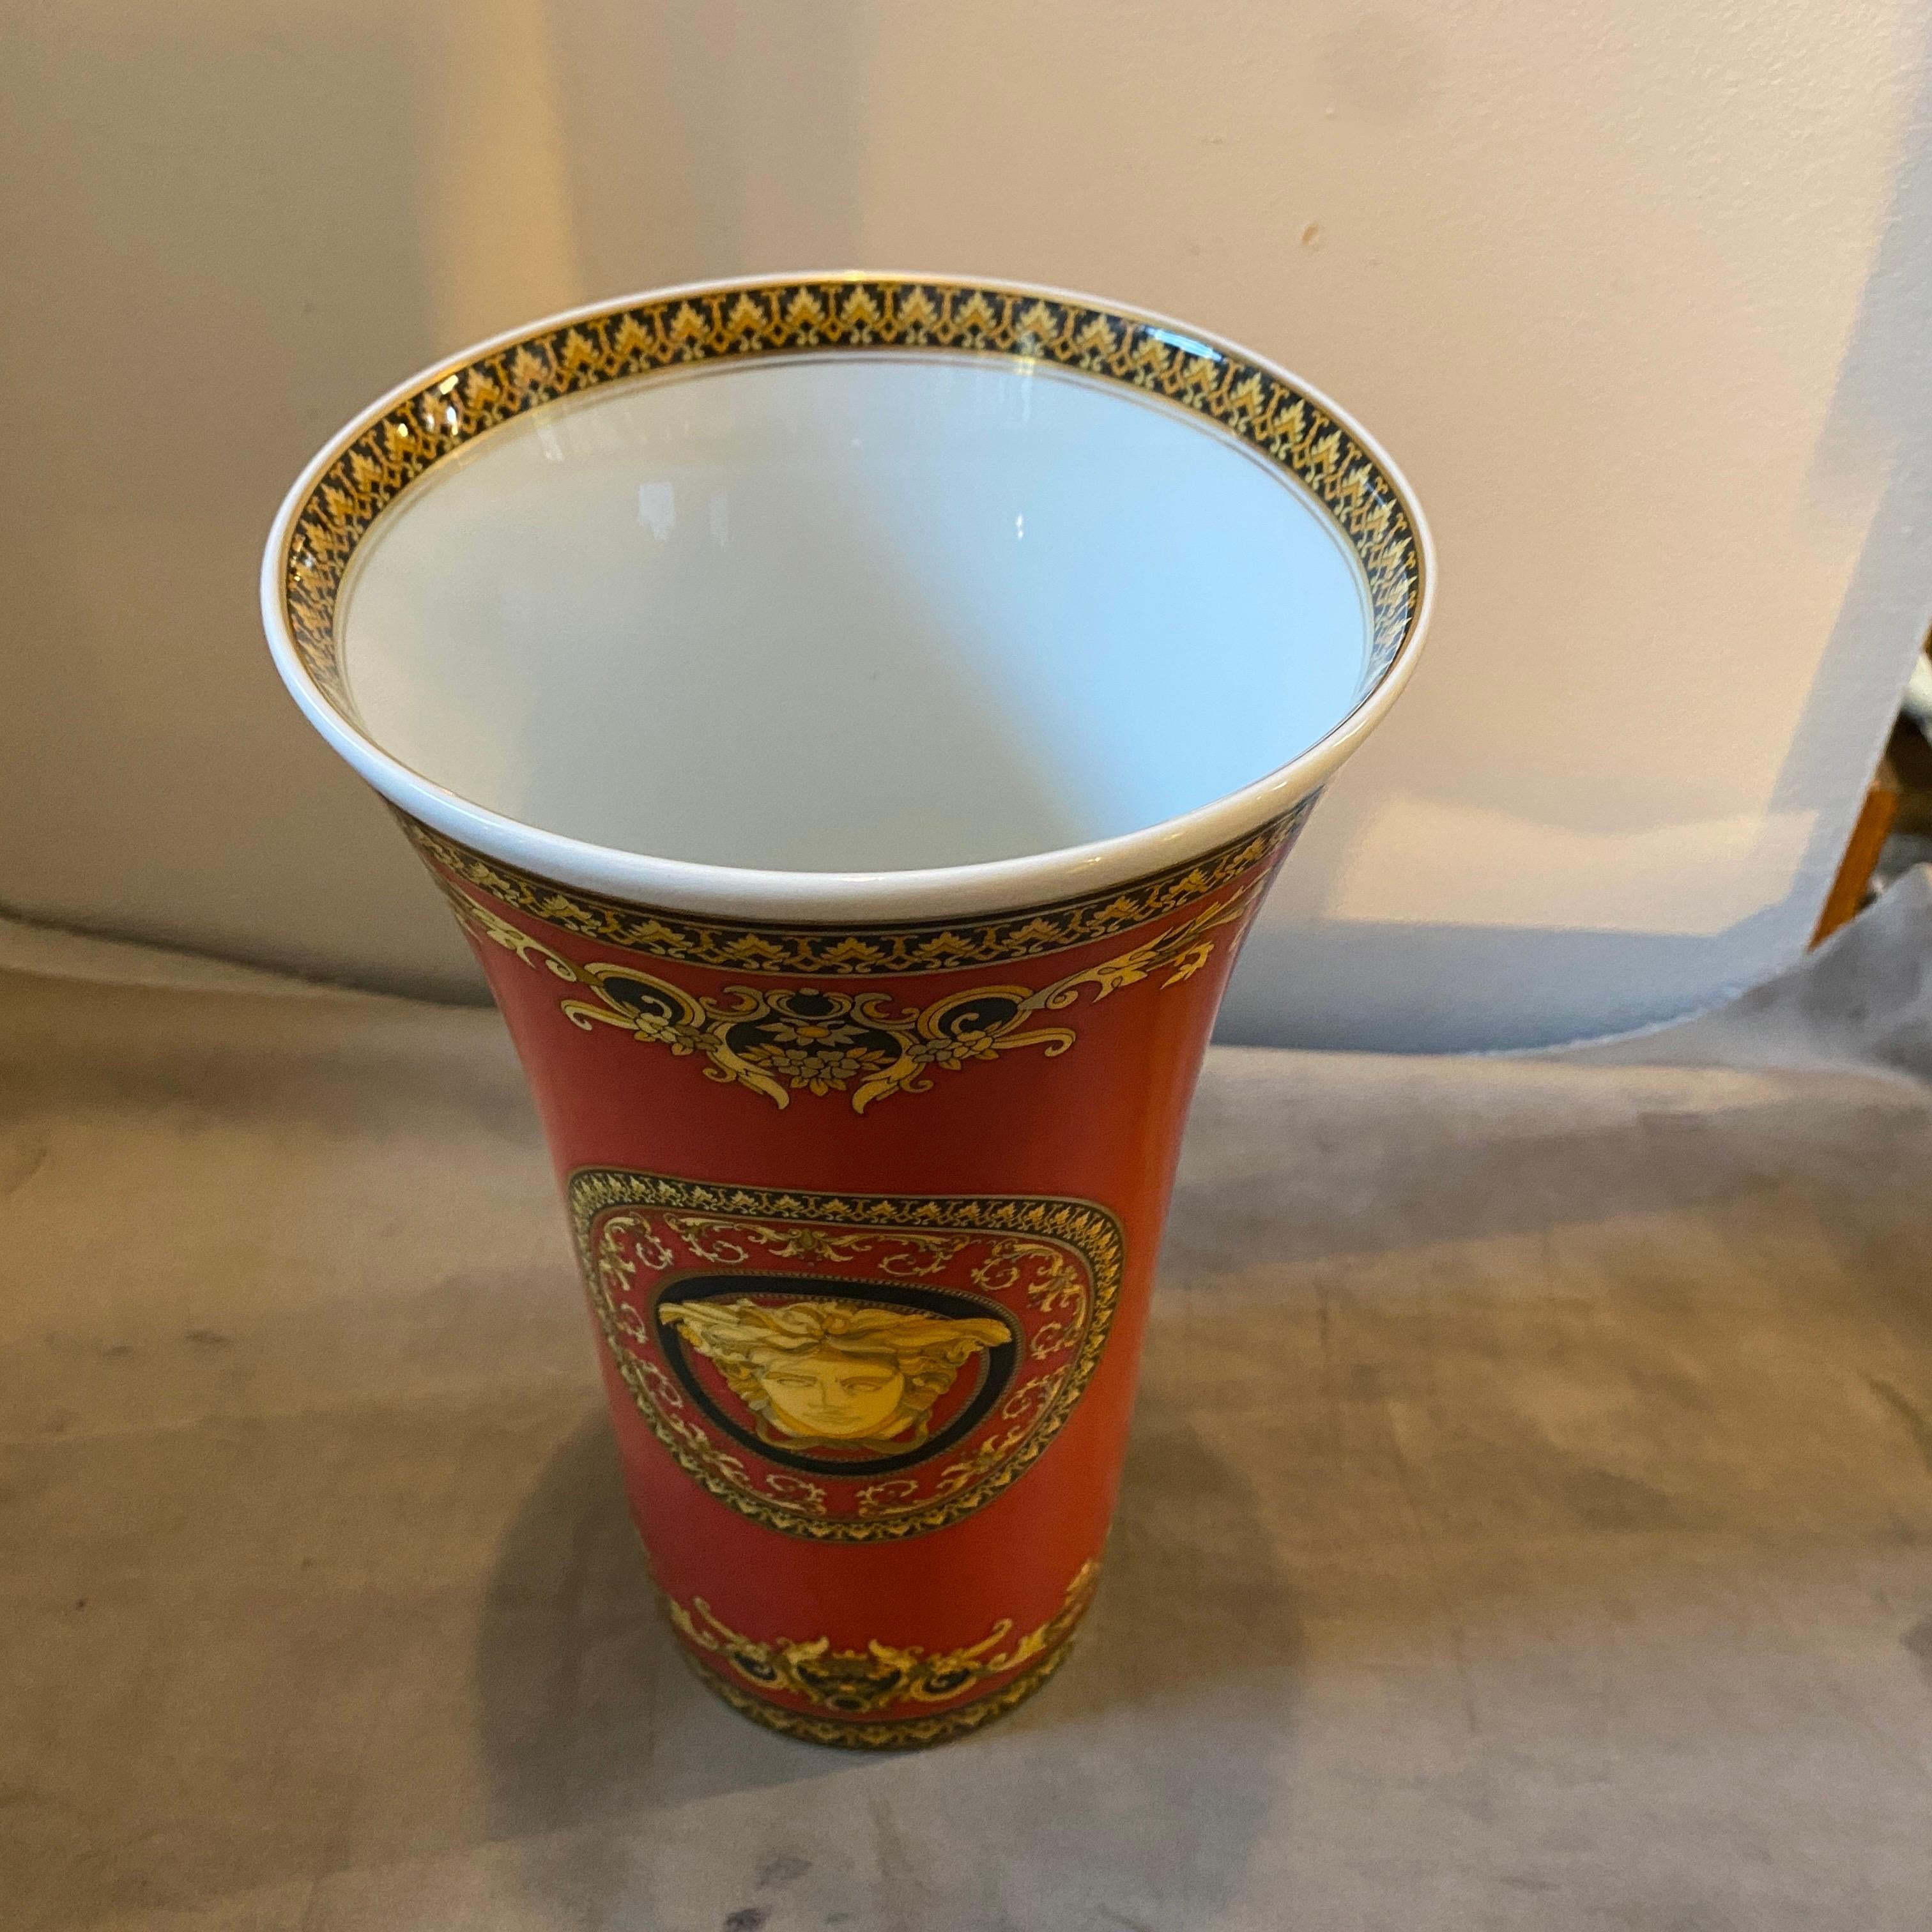 1990s, Iconic Porcelain Medusa Vase Designed by Gianni Versace for Rosenthal In Excellent Condition For Sale In Aci Castello, IT